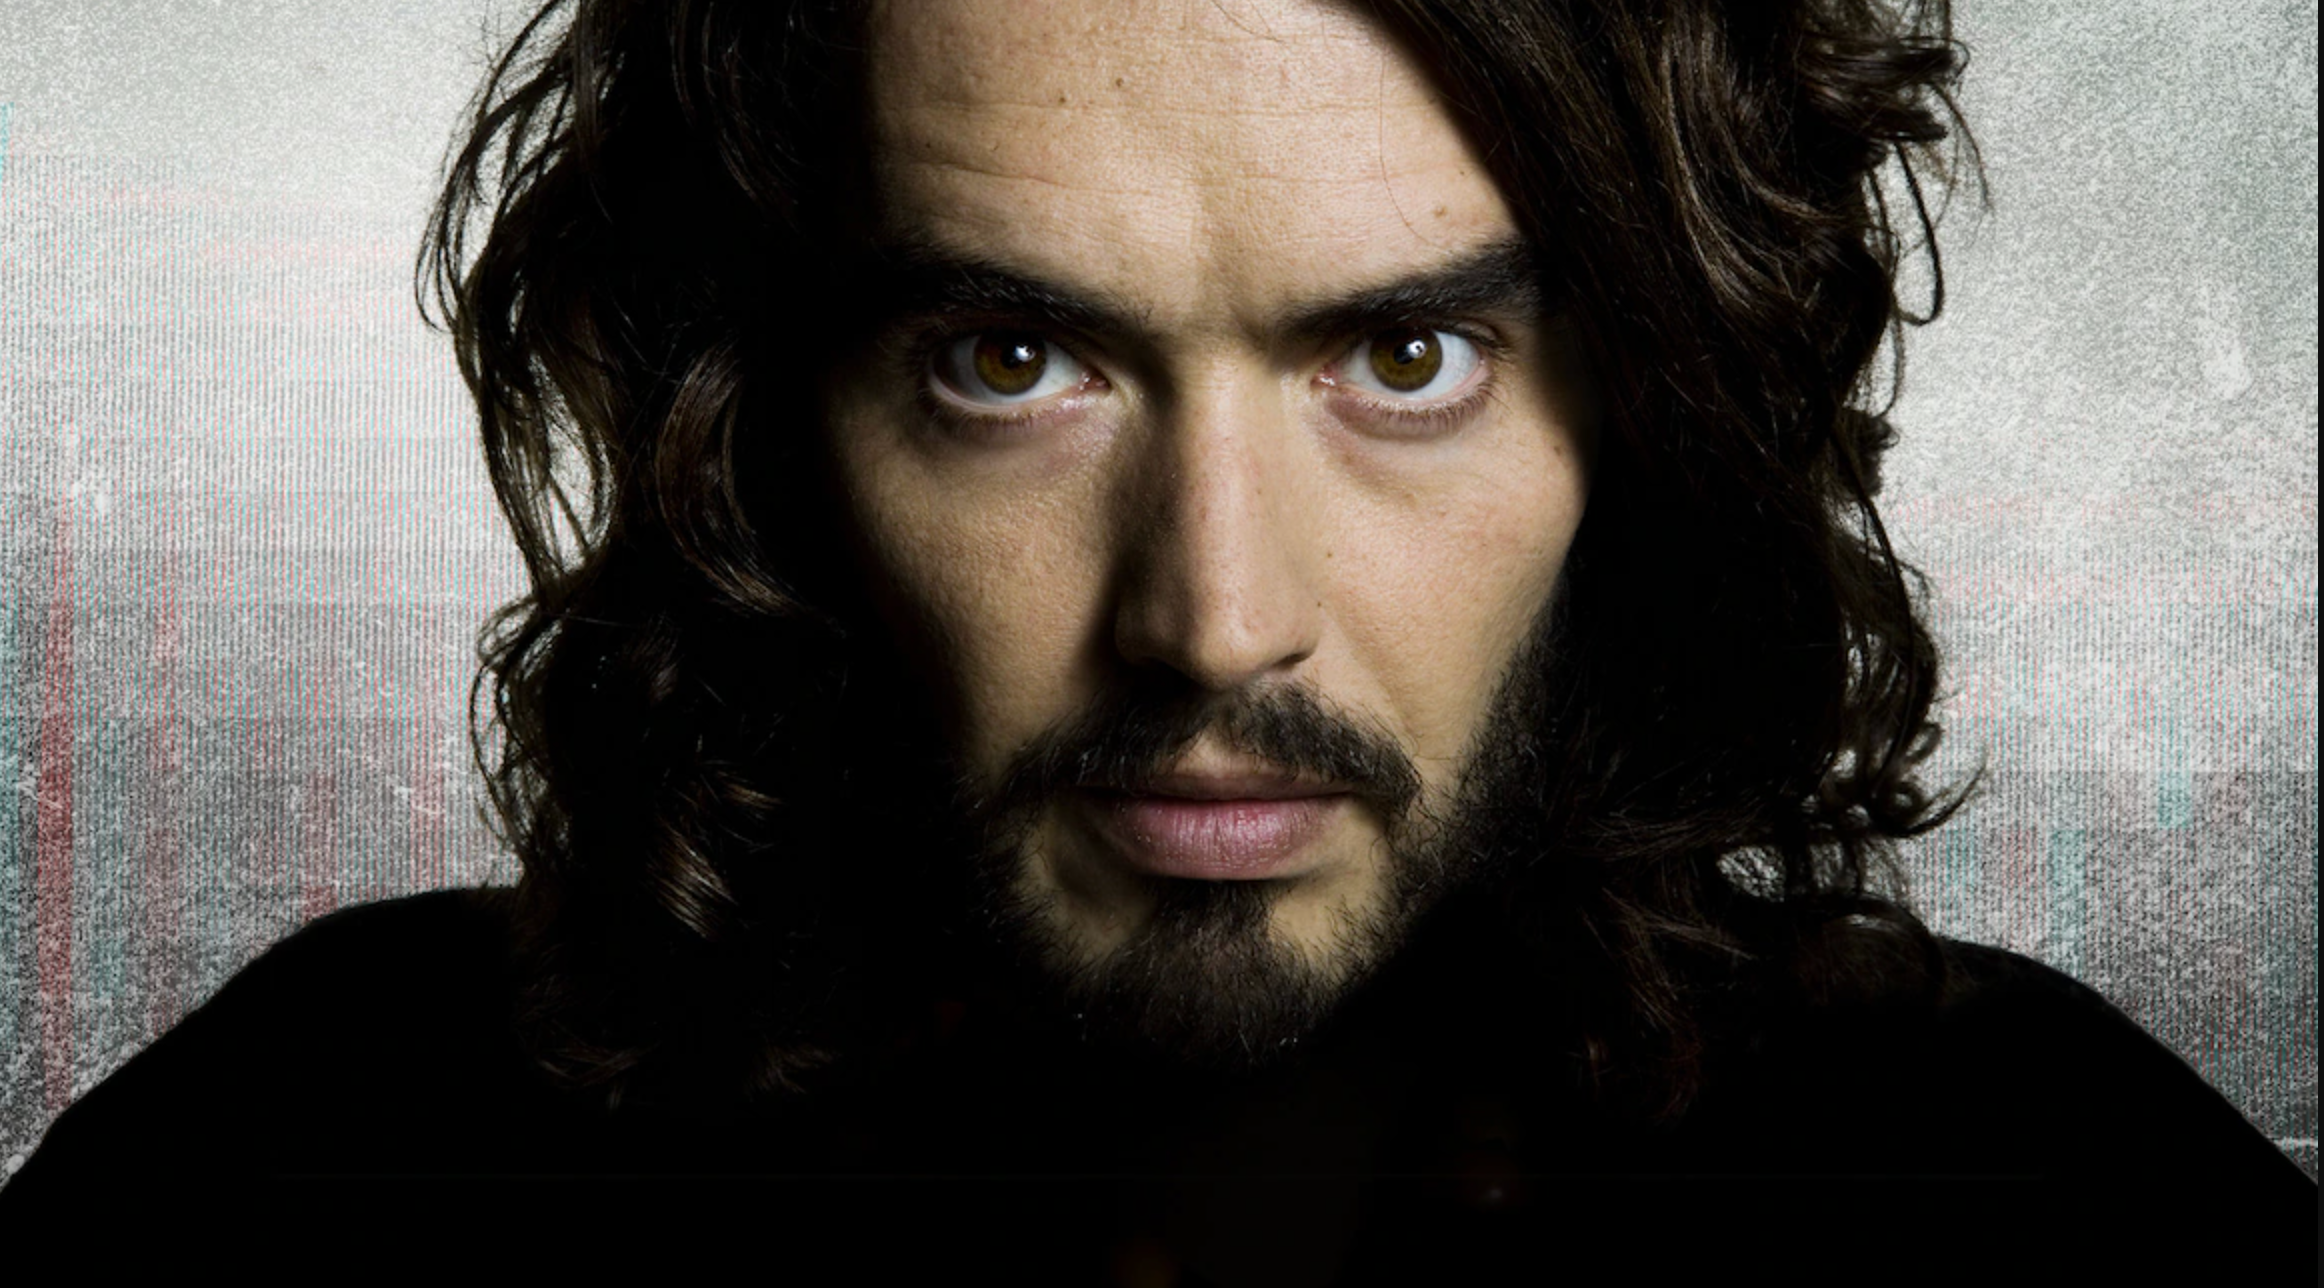 Russell Brand: In Plain Sight: Dispatches, Channel 4